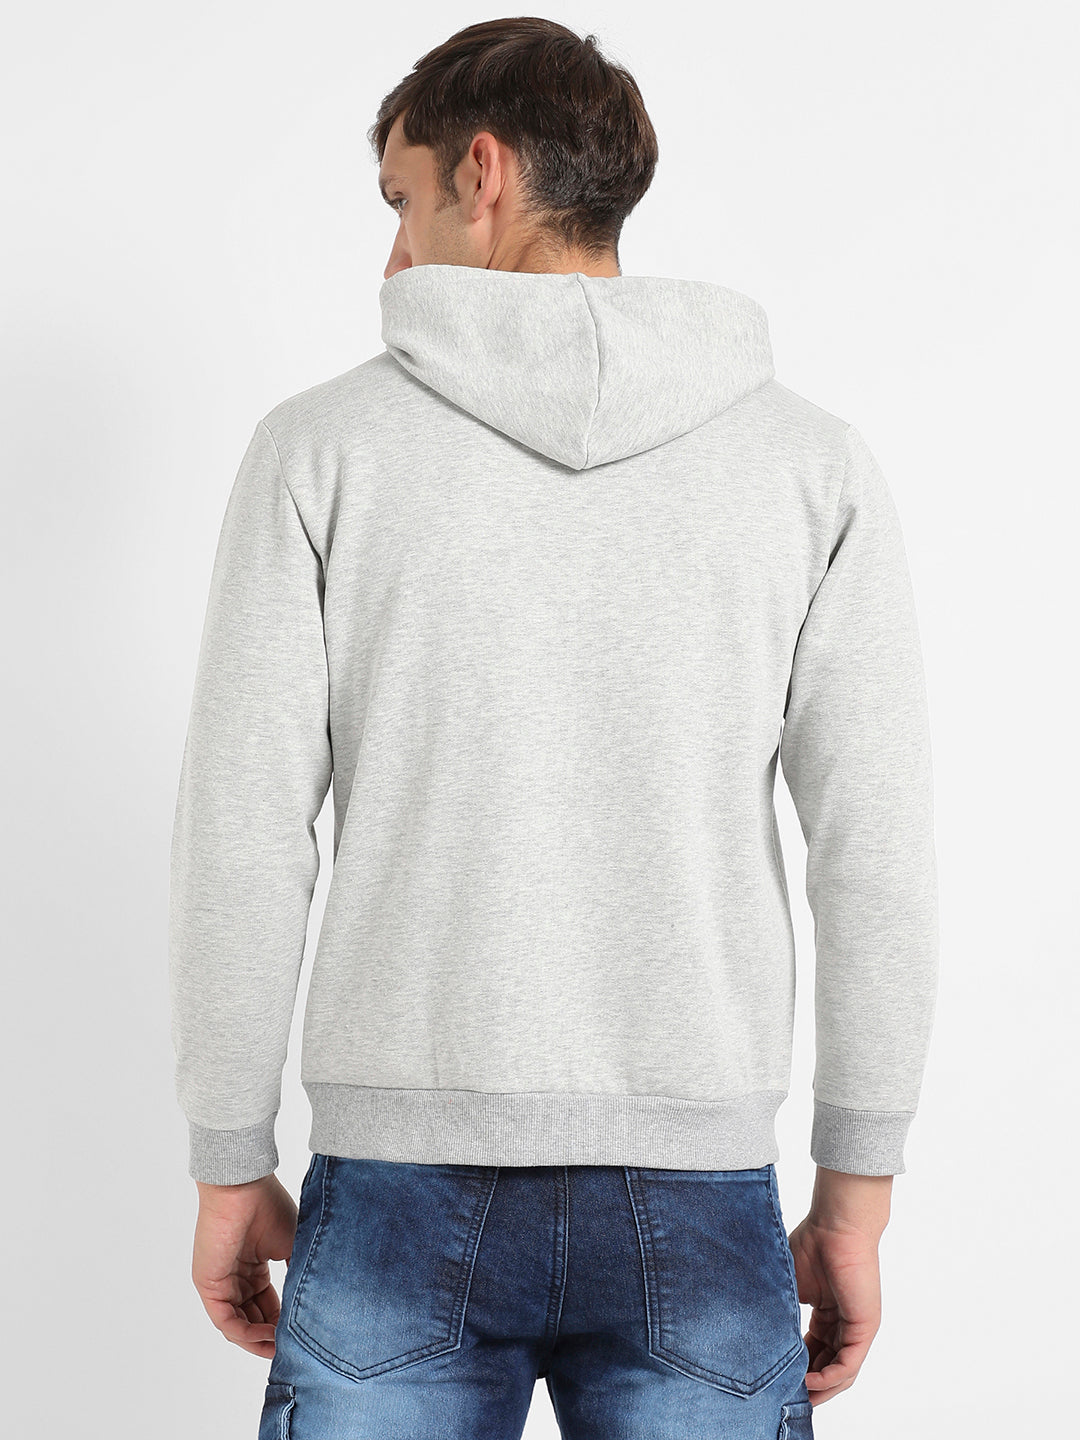 Be Your Own Item Hoodie With Insert Pocket